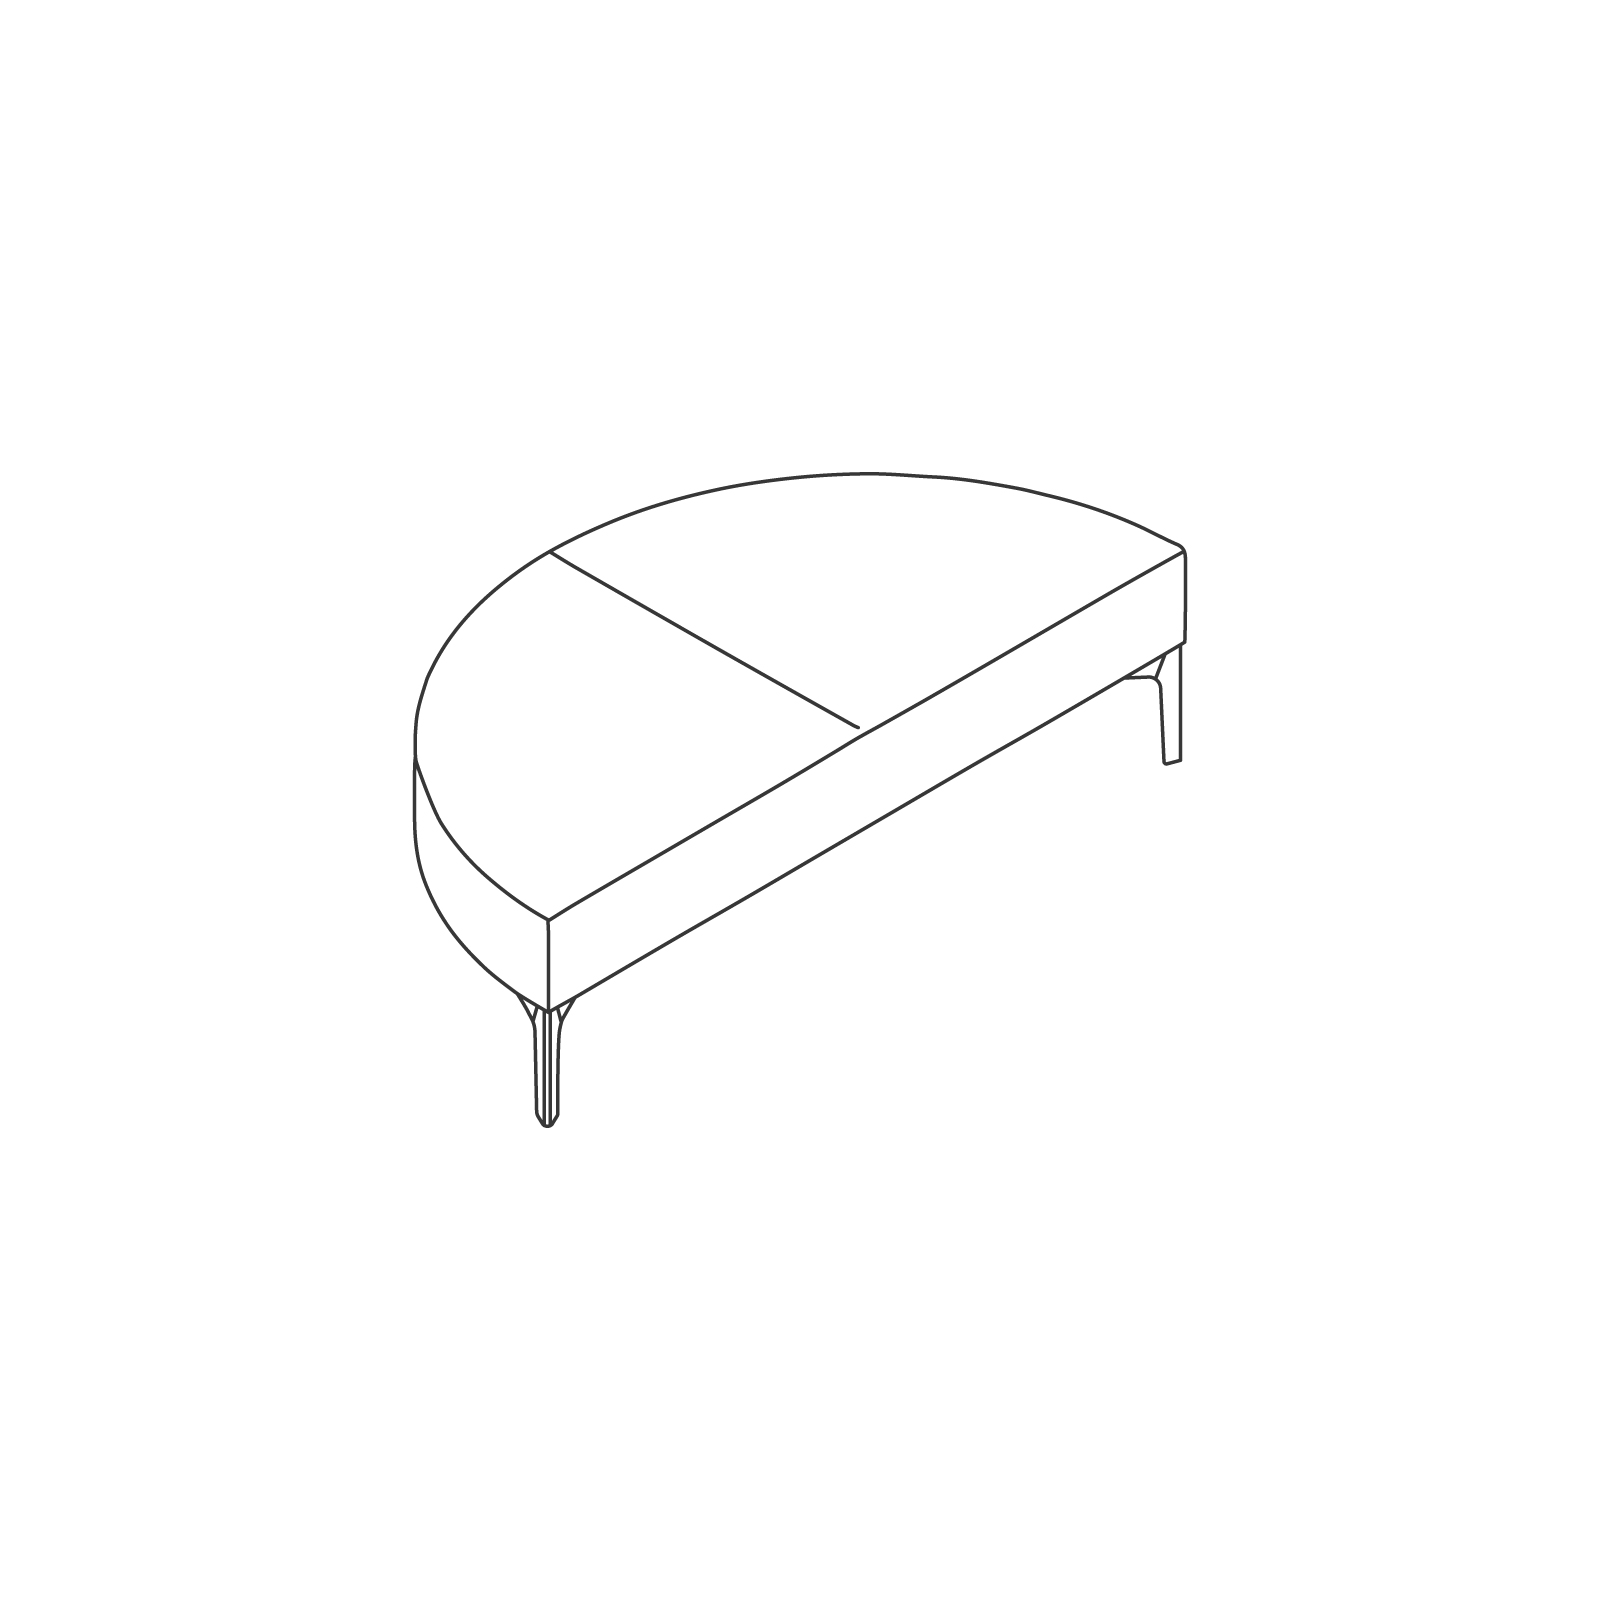 A line drawing - Symbol Bench–180-Degree External Curve